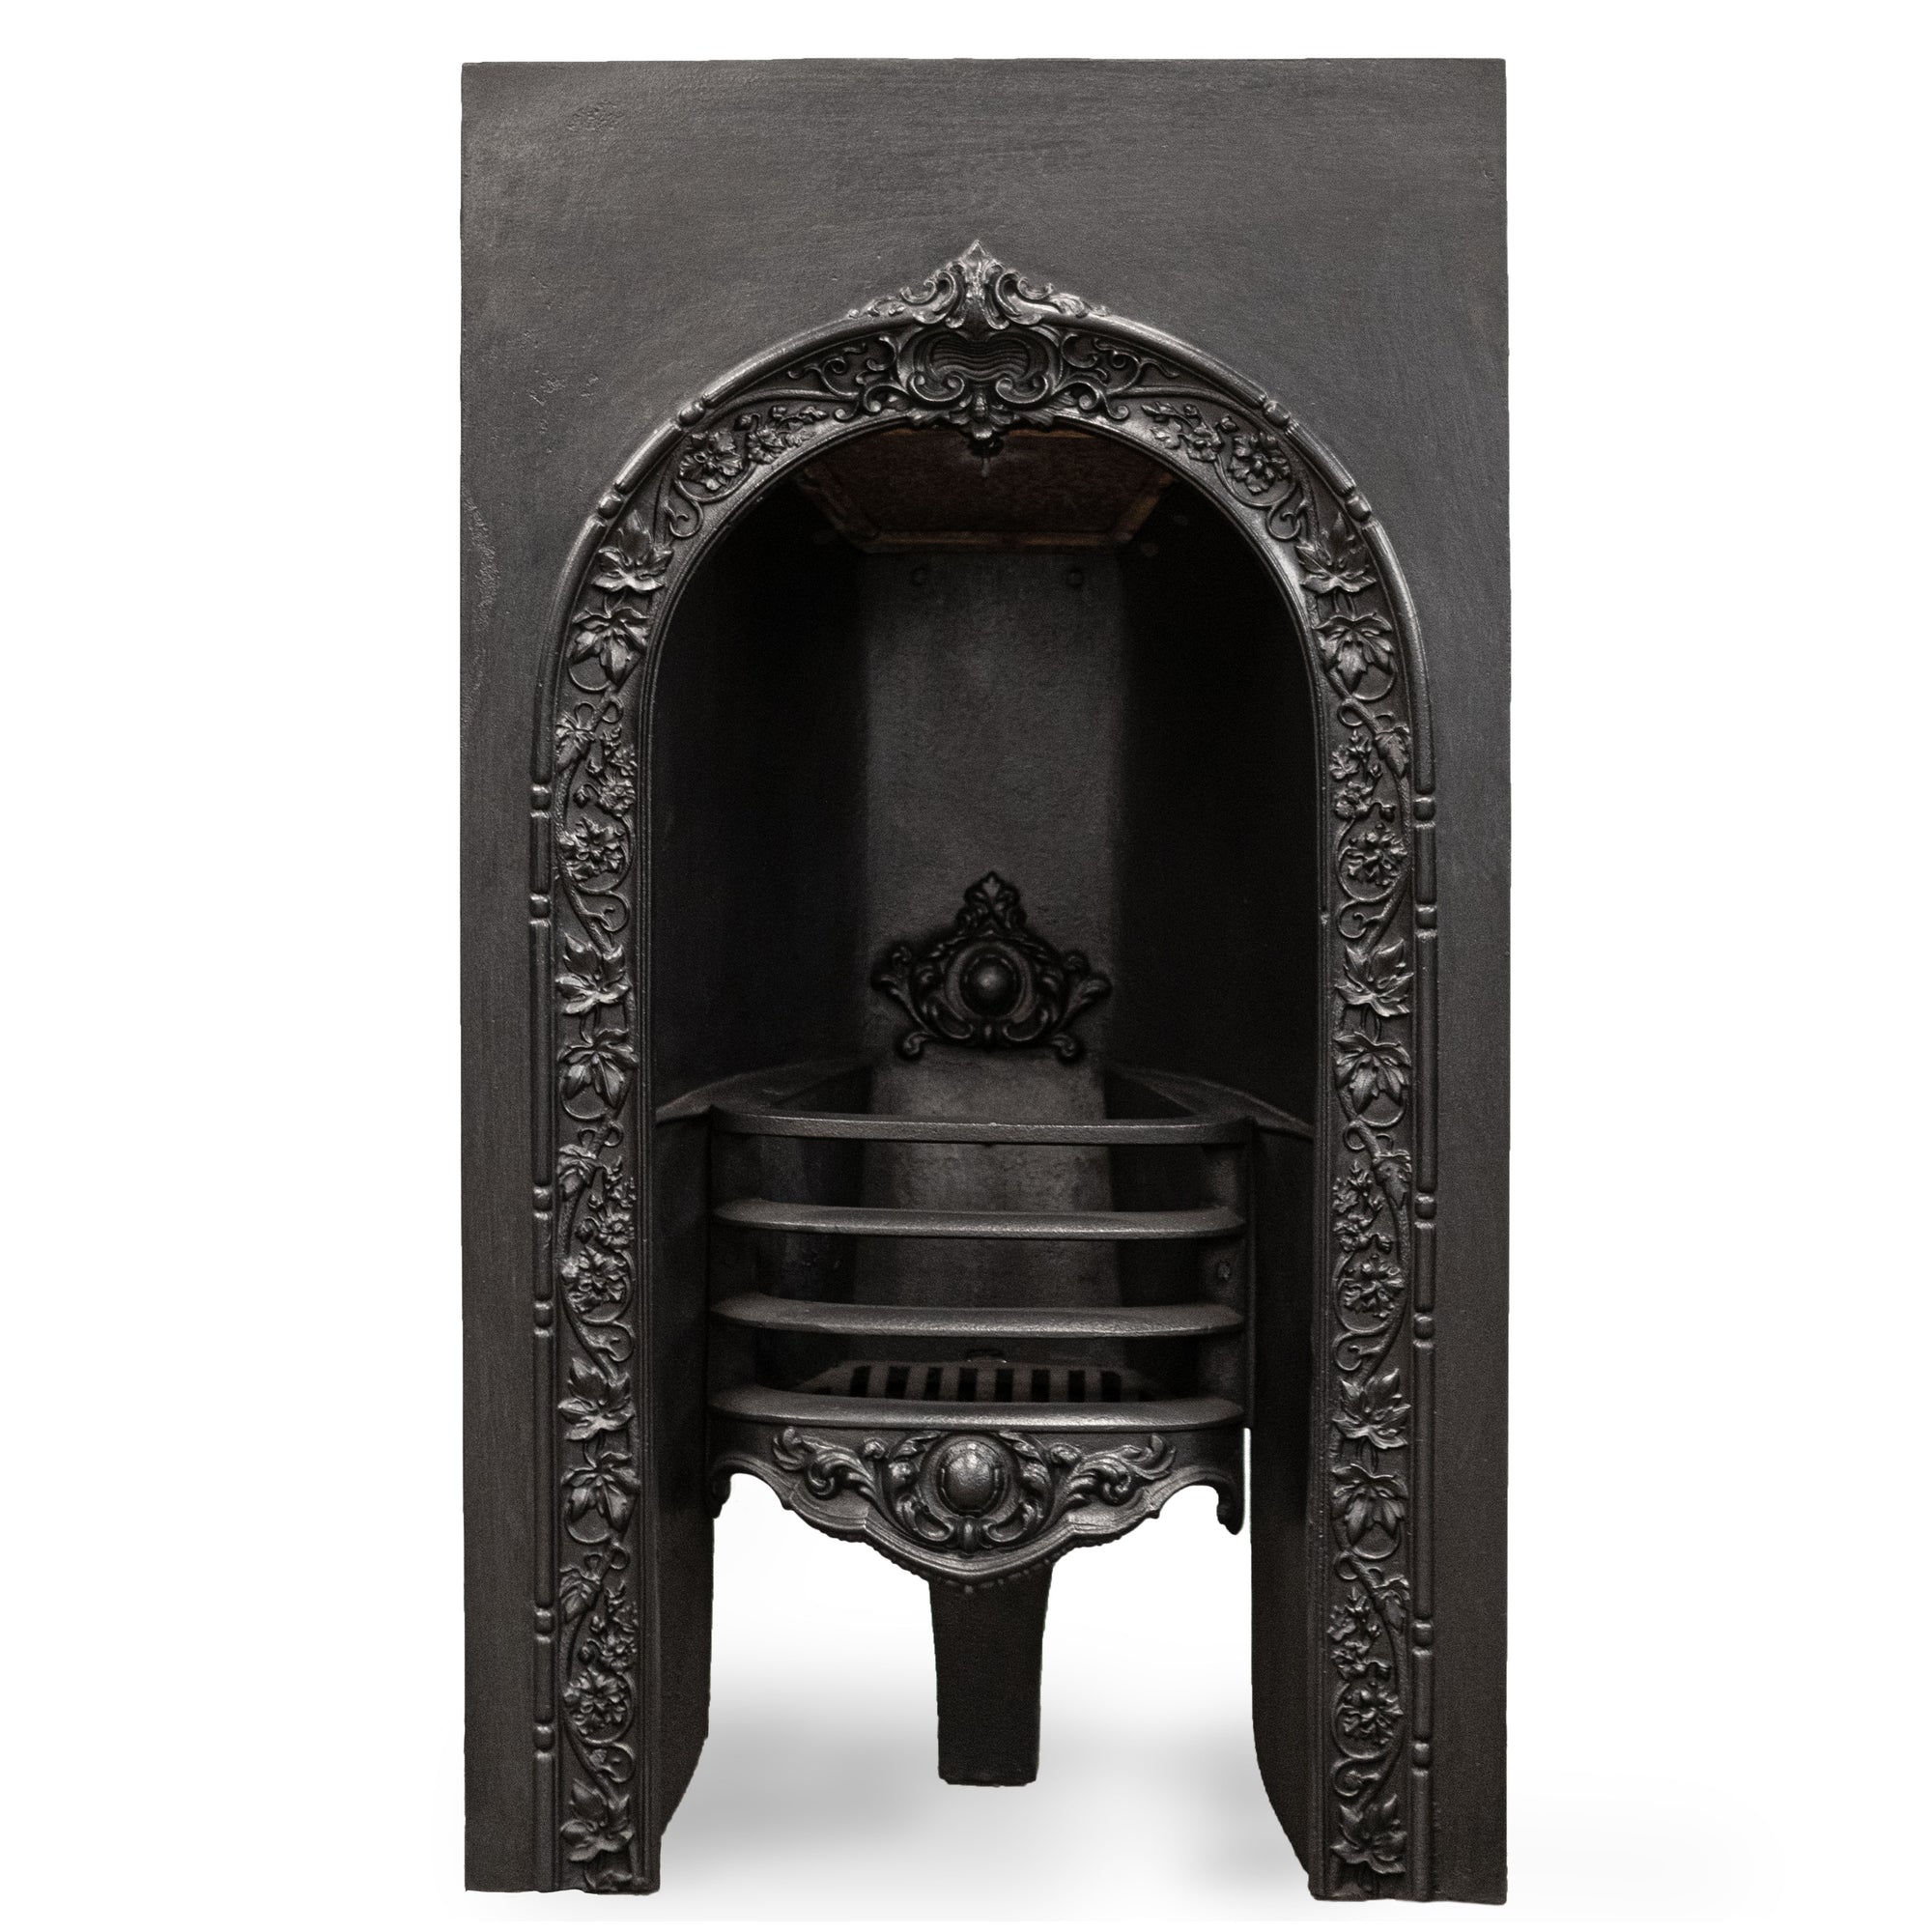 Antique Ornate Victorian Cast Iron Arched Insert (pair available) | The Architectural Forum